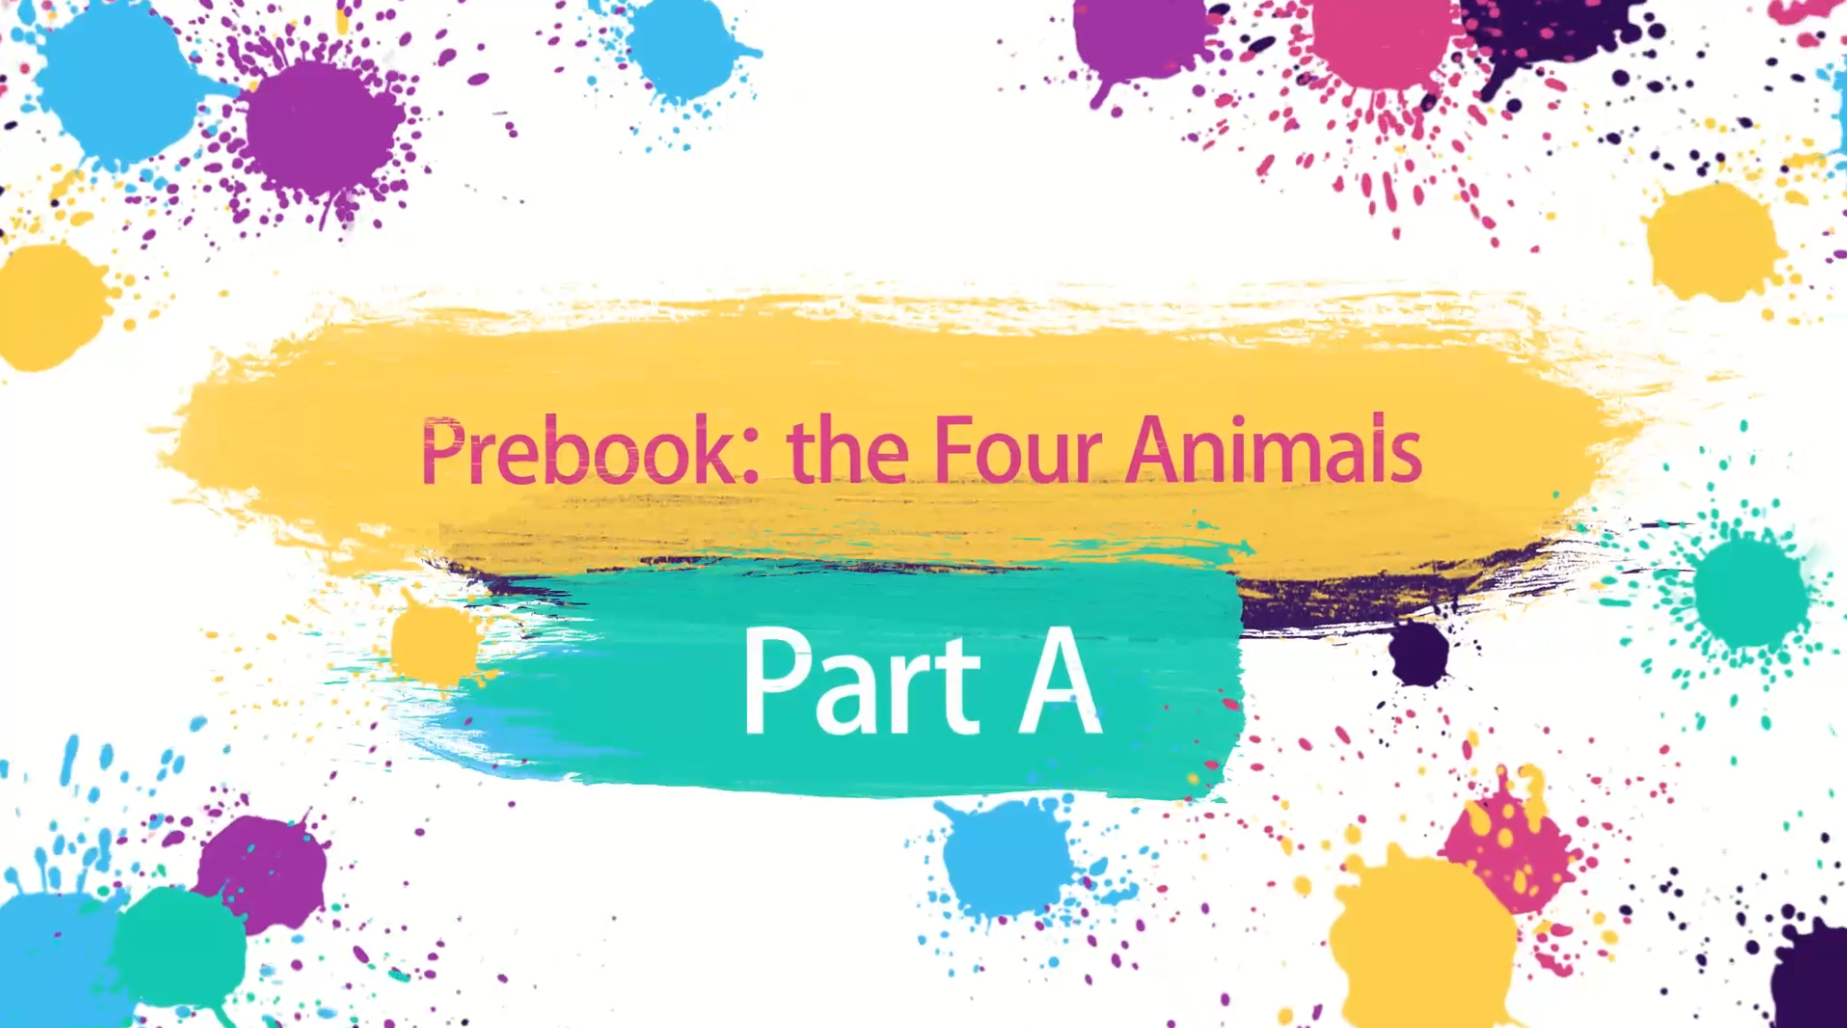 The Four Animals